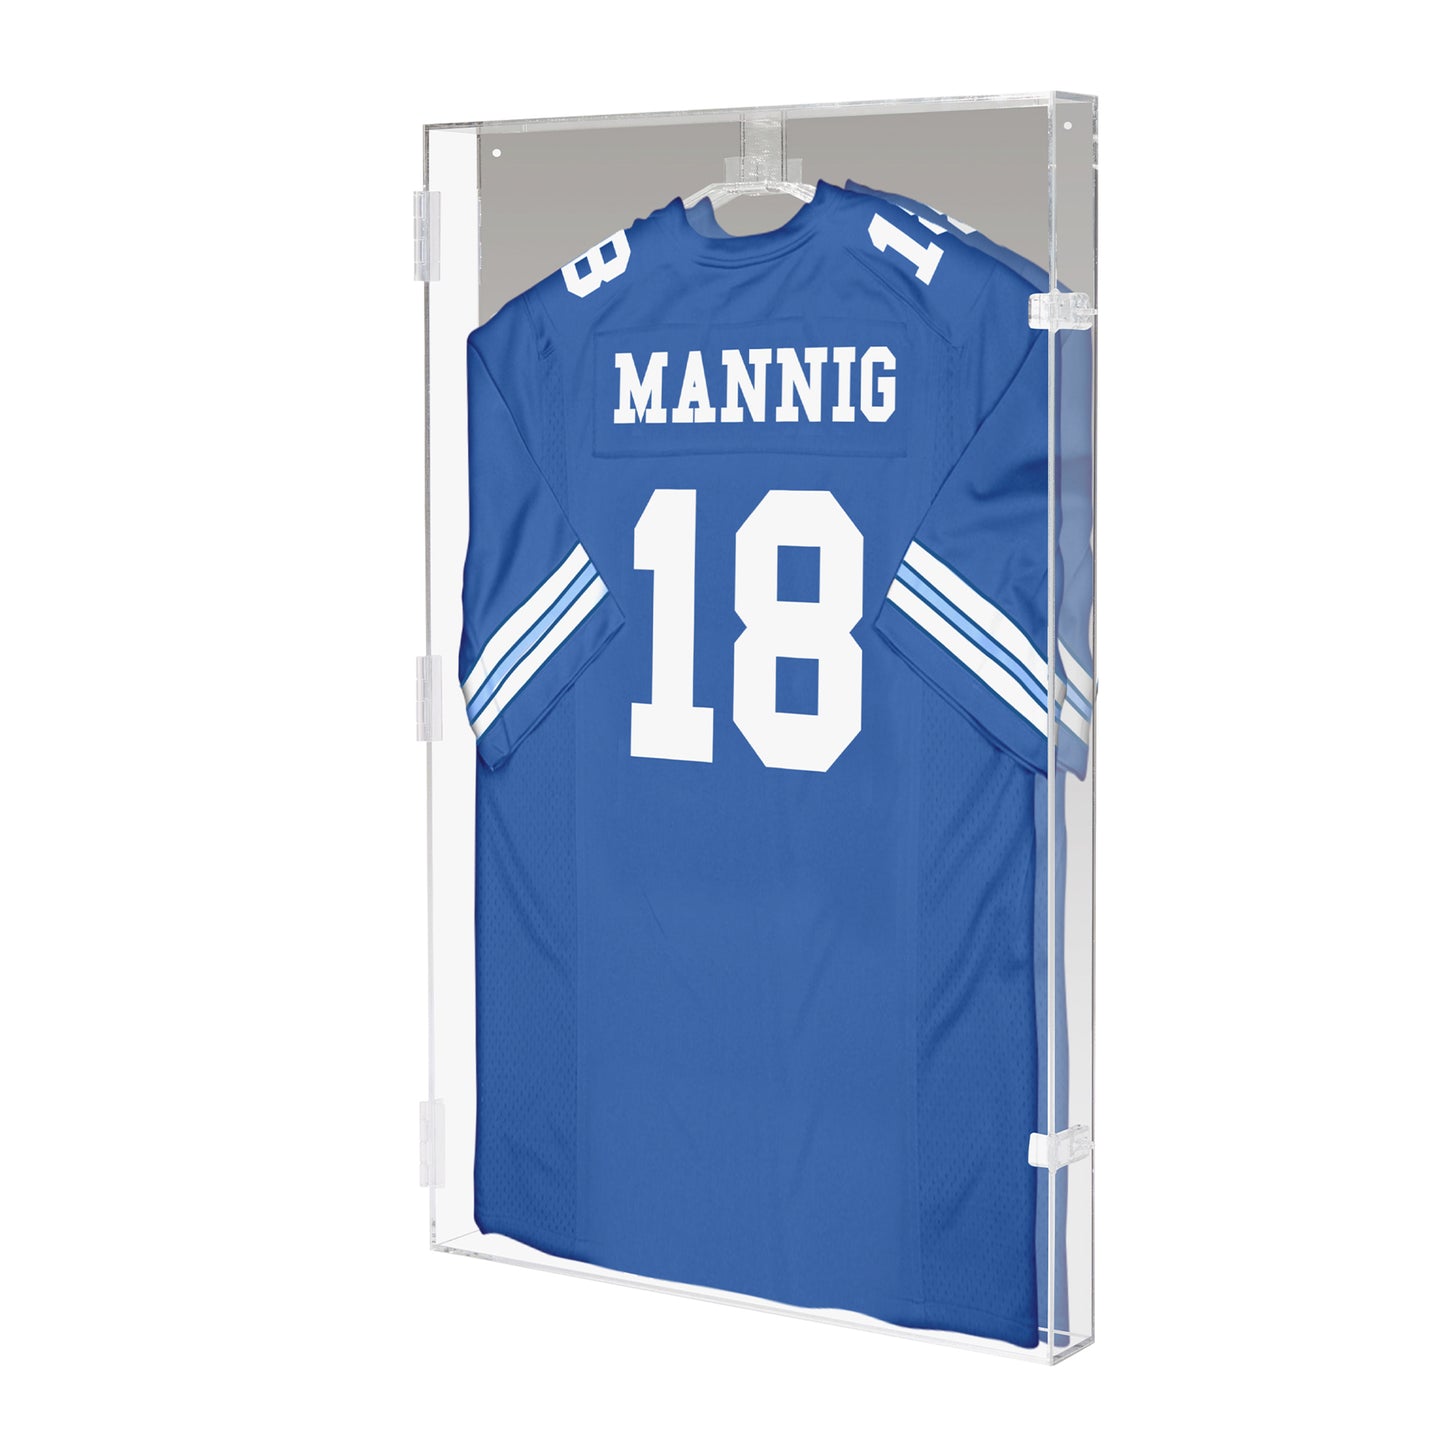 Clear Acrylic Jersey Display Case